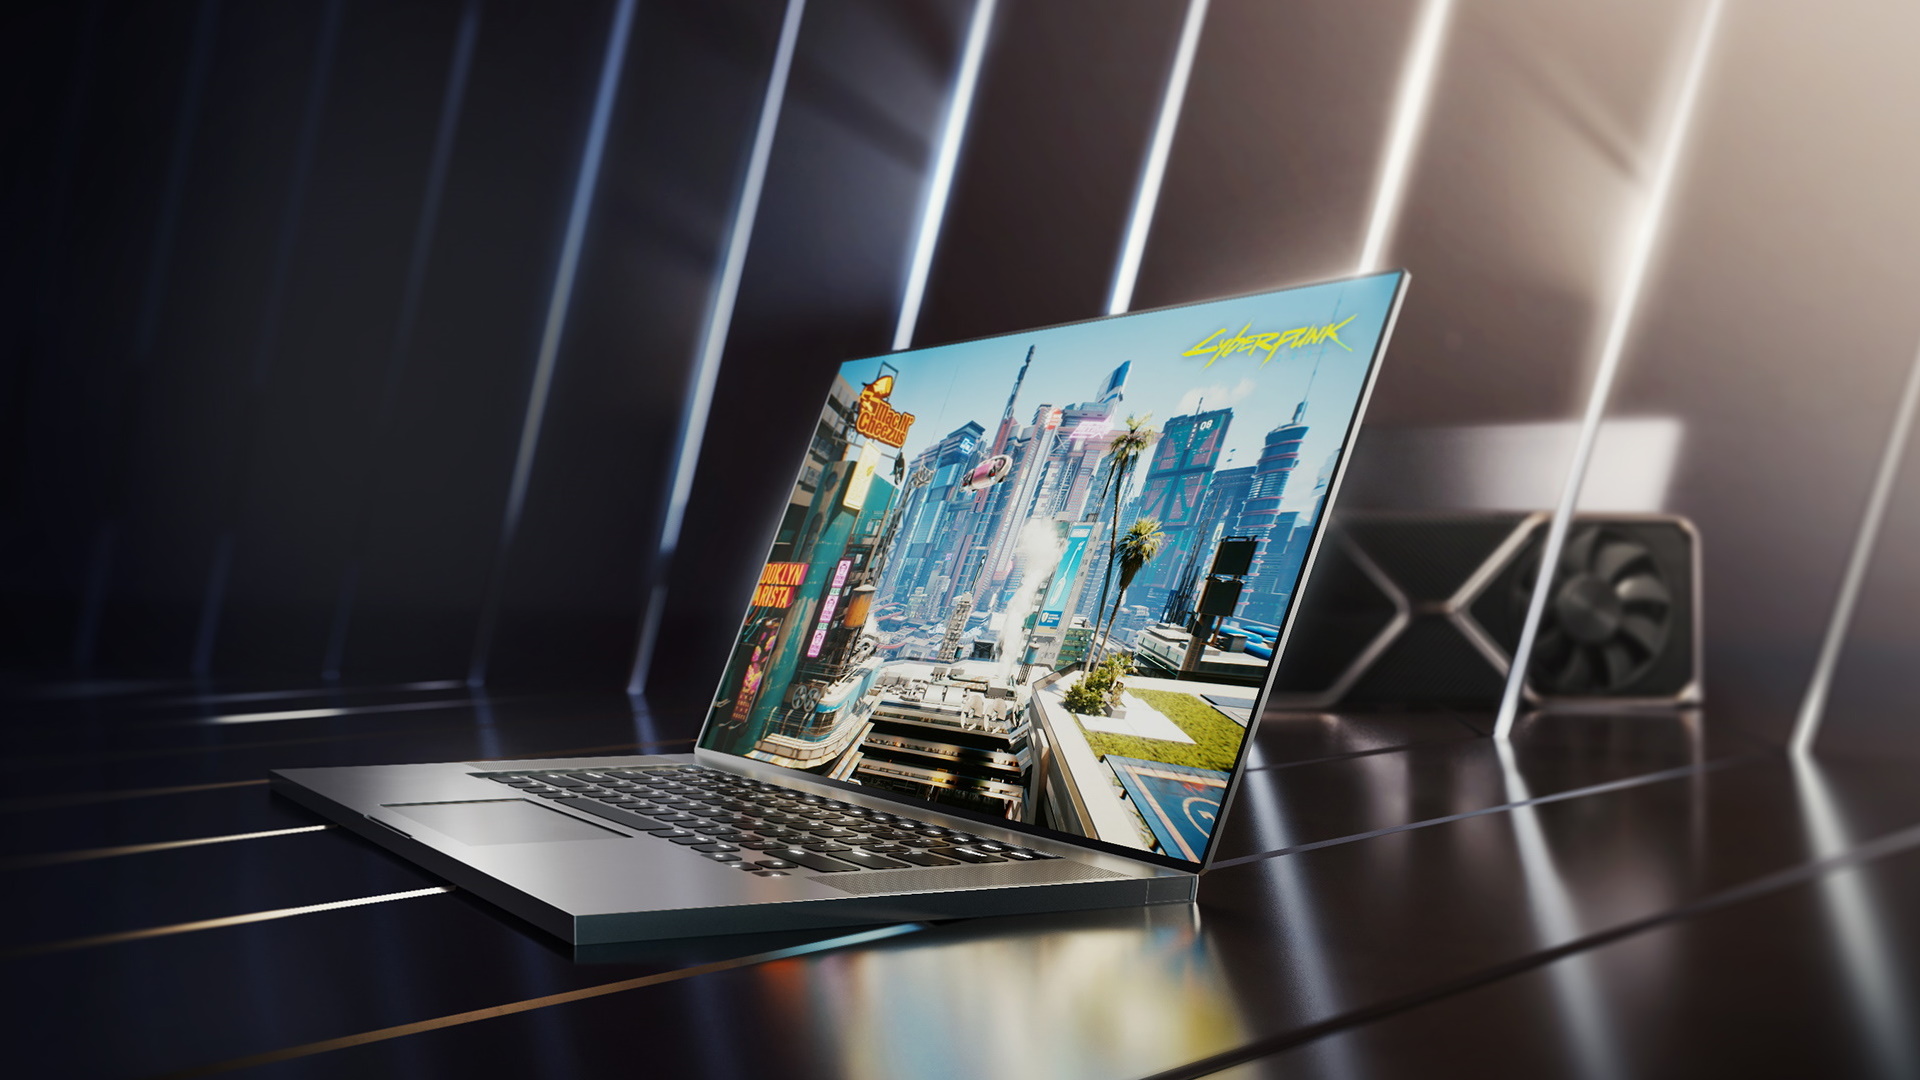  The most lust-worthy laptops of CES 2021 